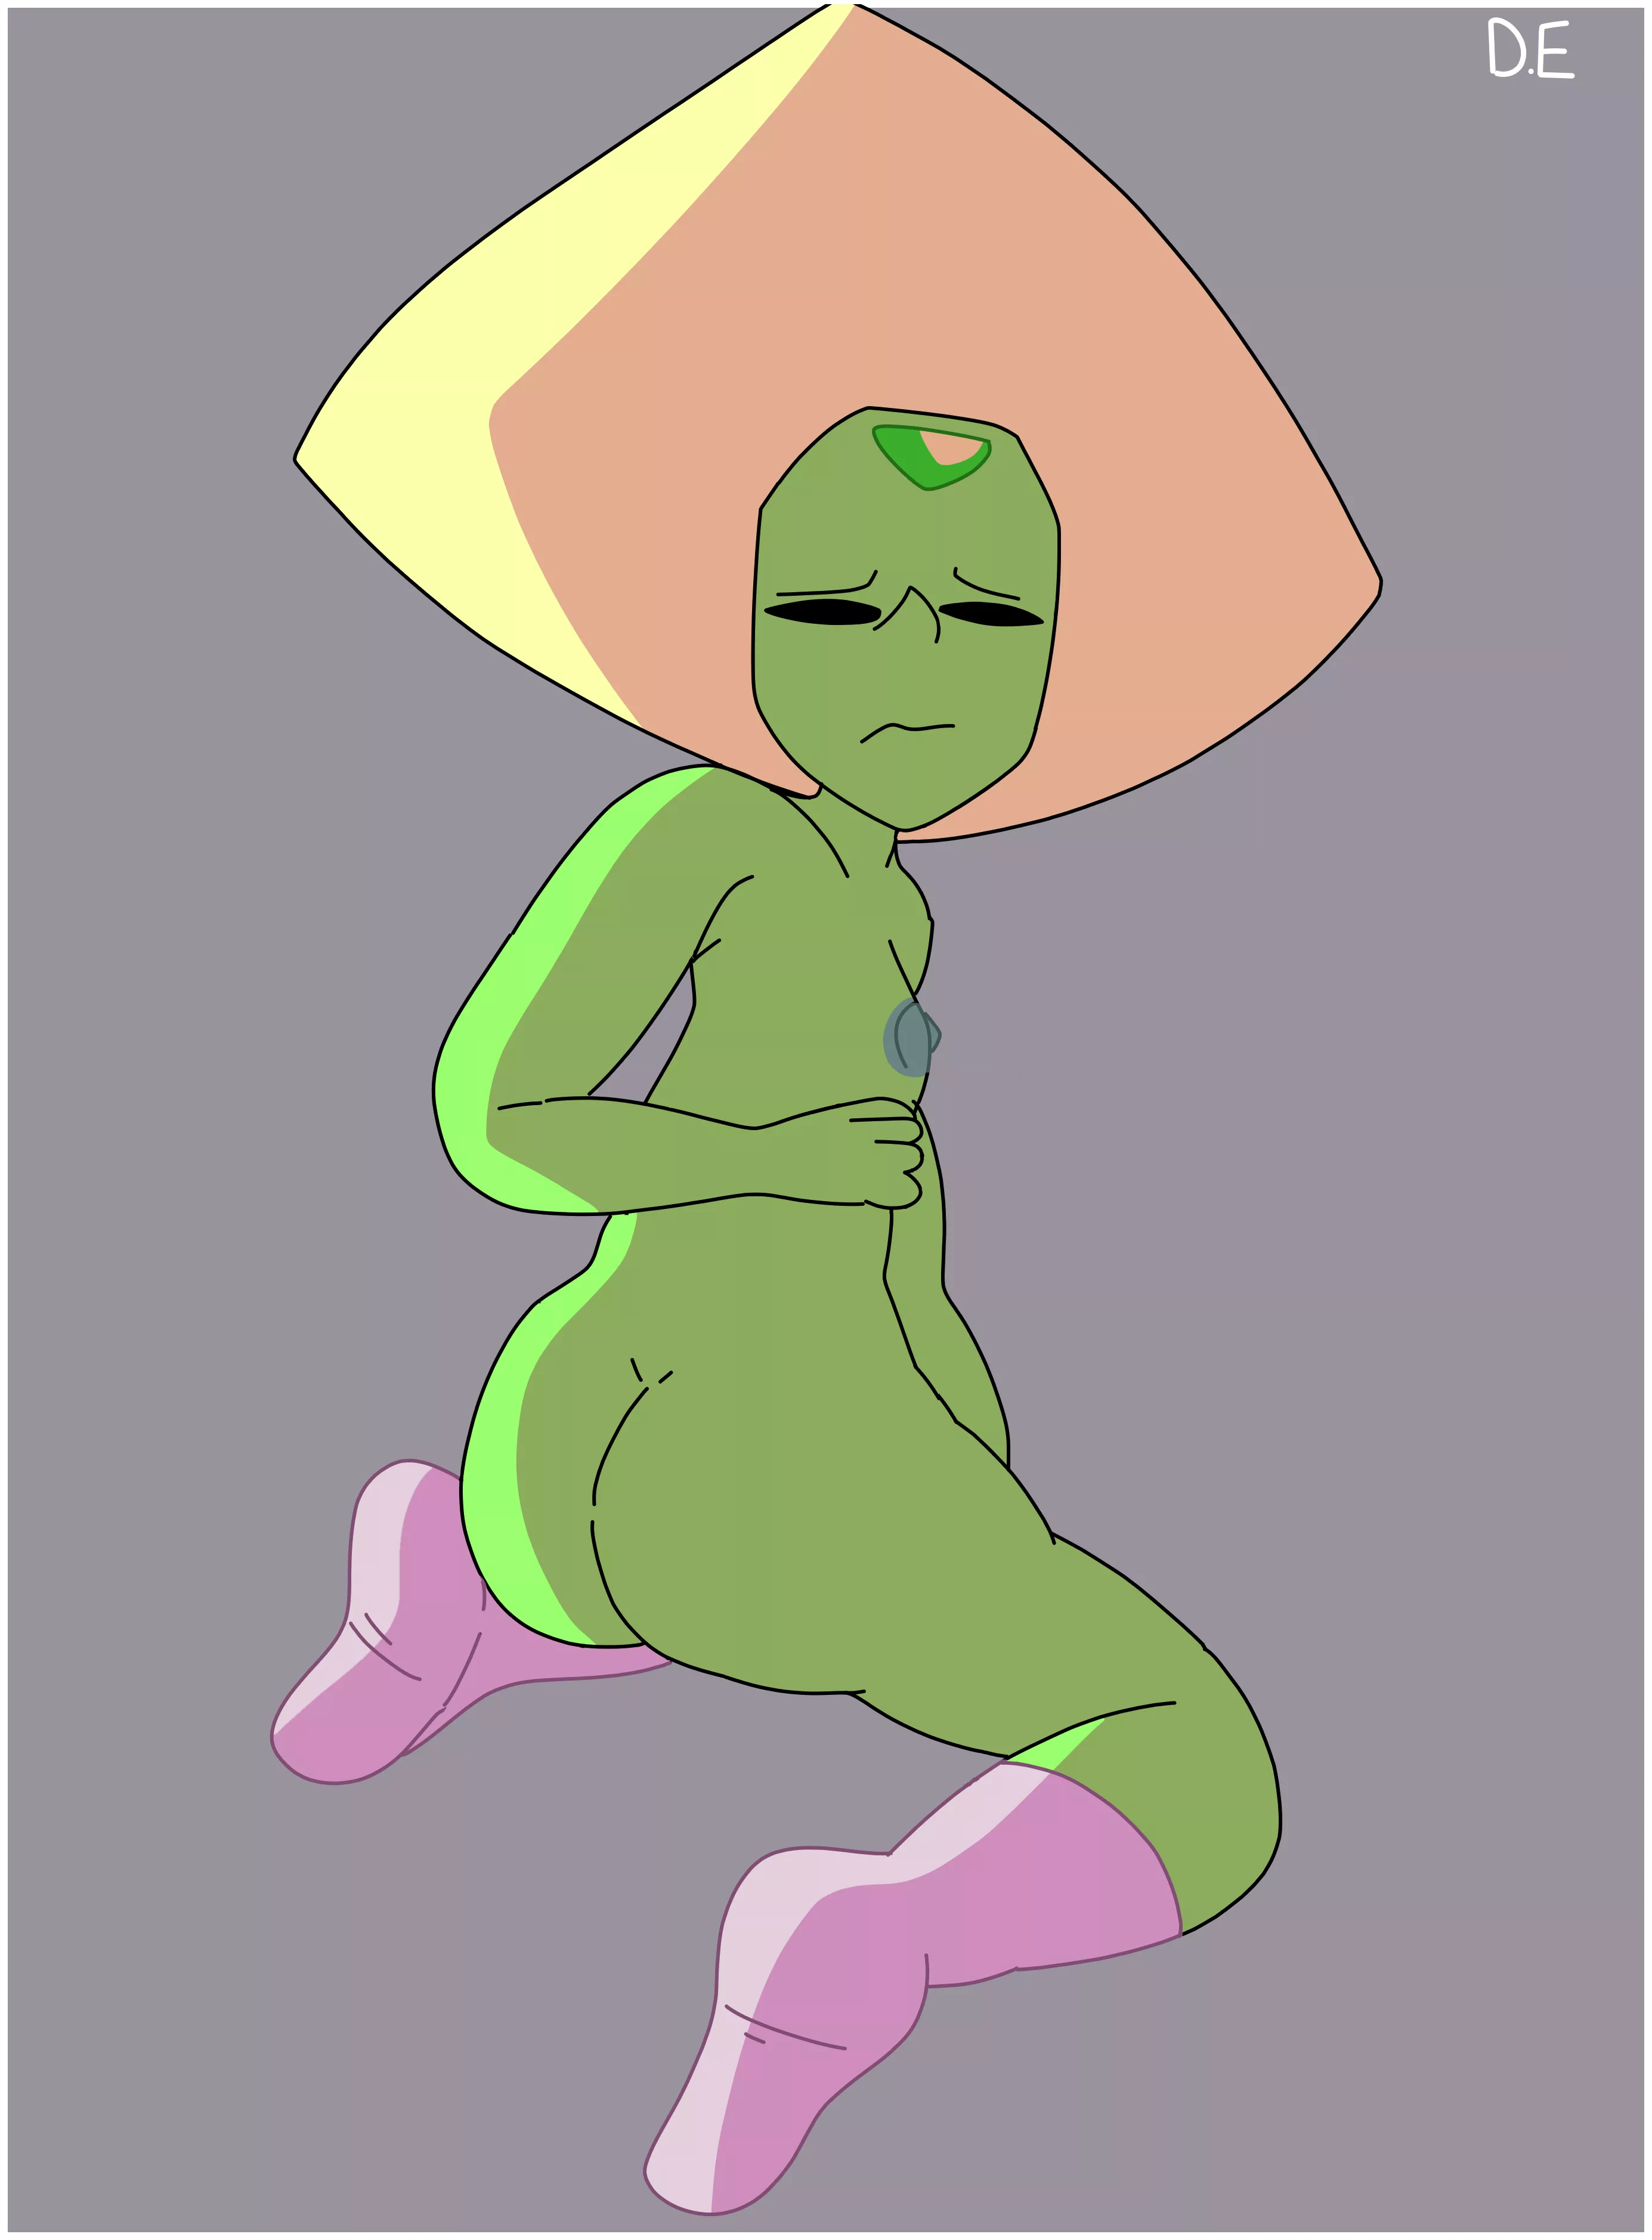 Peridot Steven Universe Porn Ass - Peridot porn butt she is only wearing socks nudes by Drawinecchi